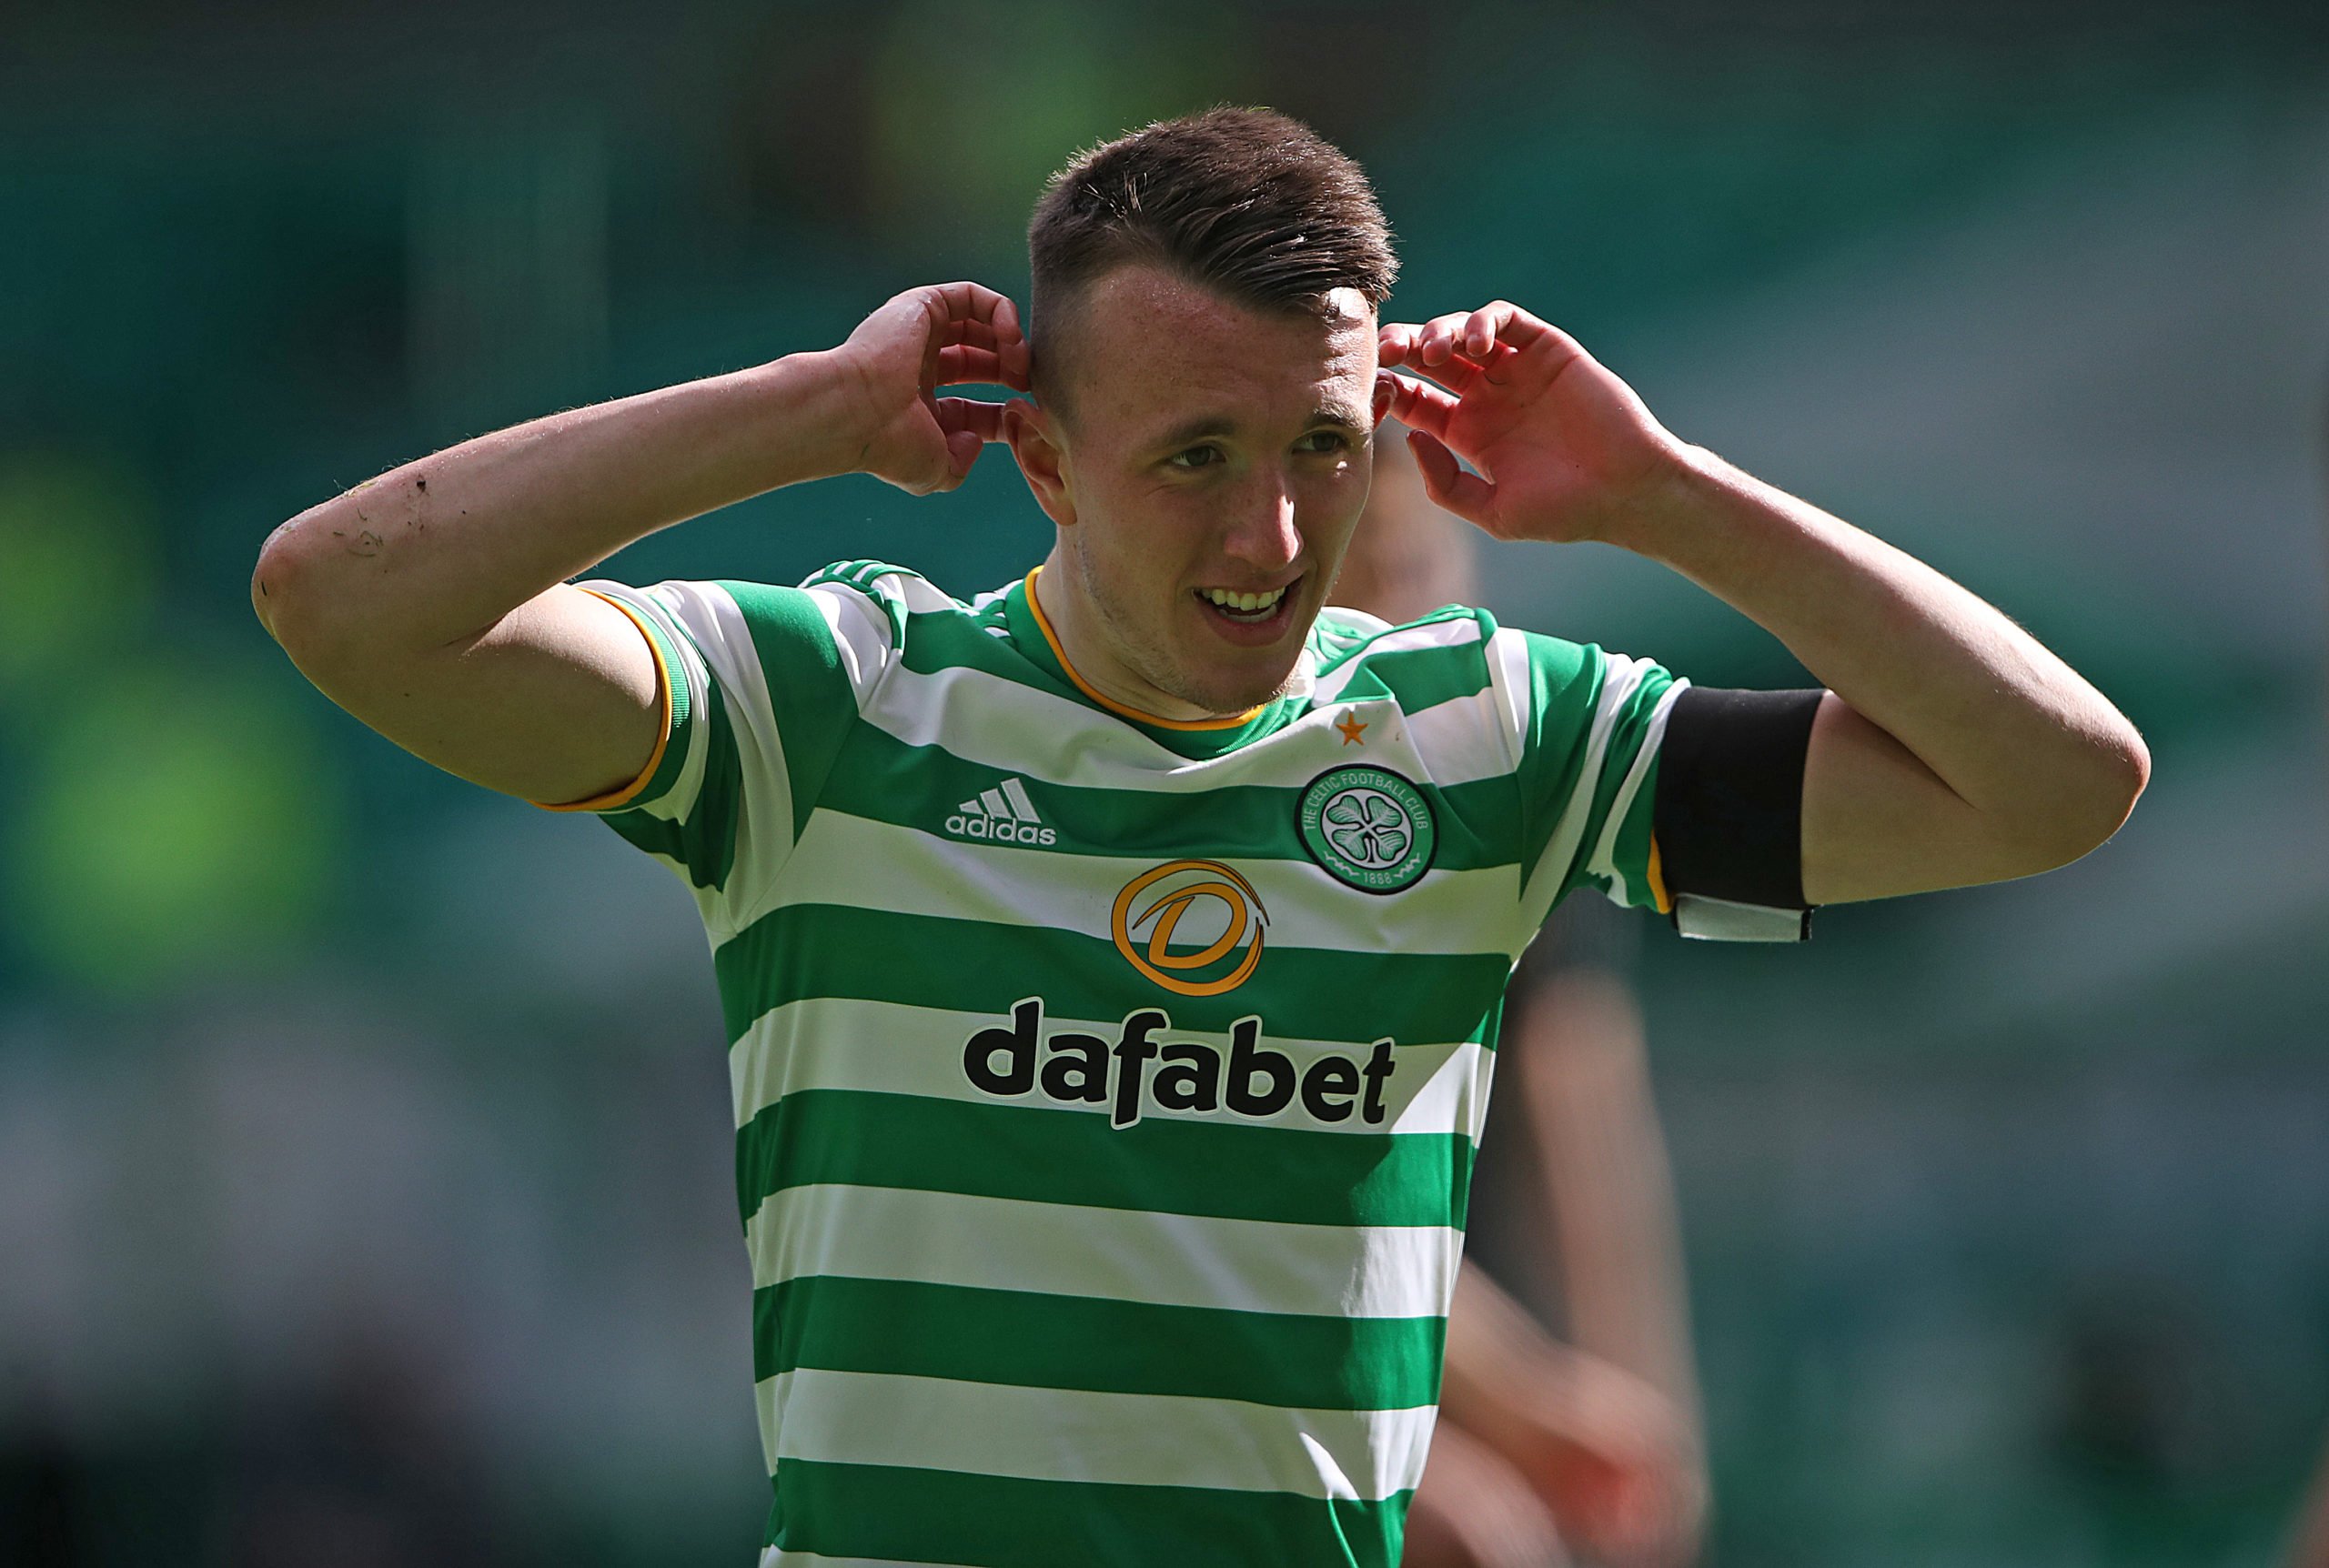 BBC pundits big up Celtic's Turnbull after nomination; question Patterson inclusion